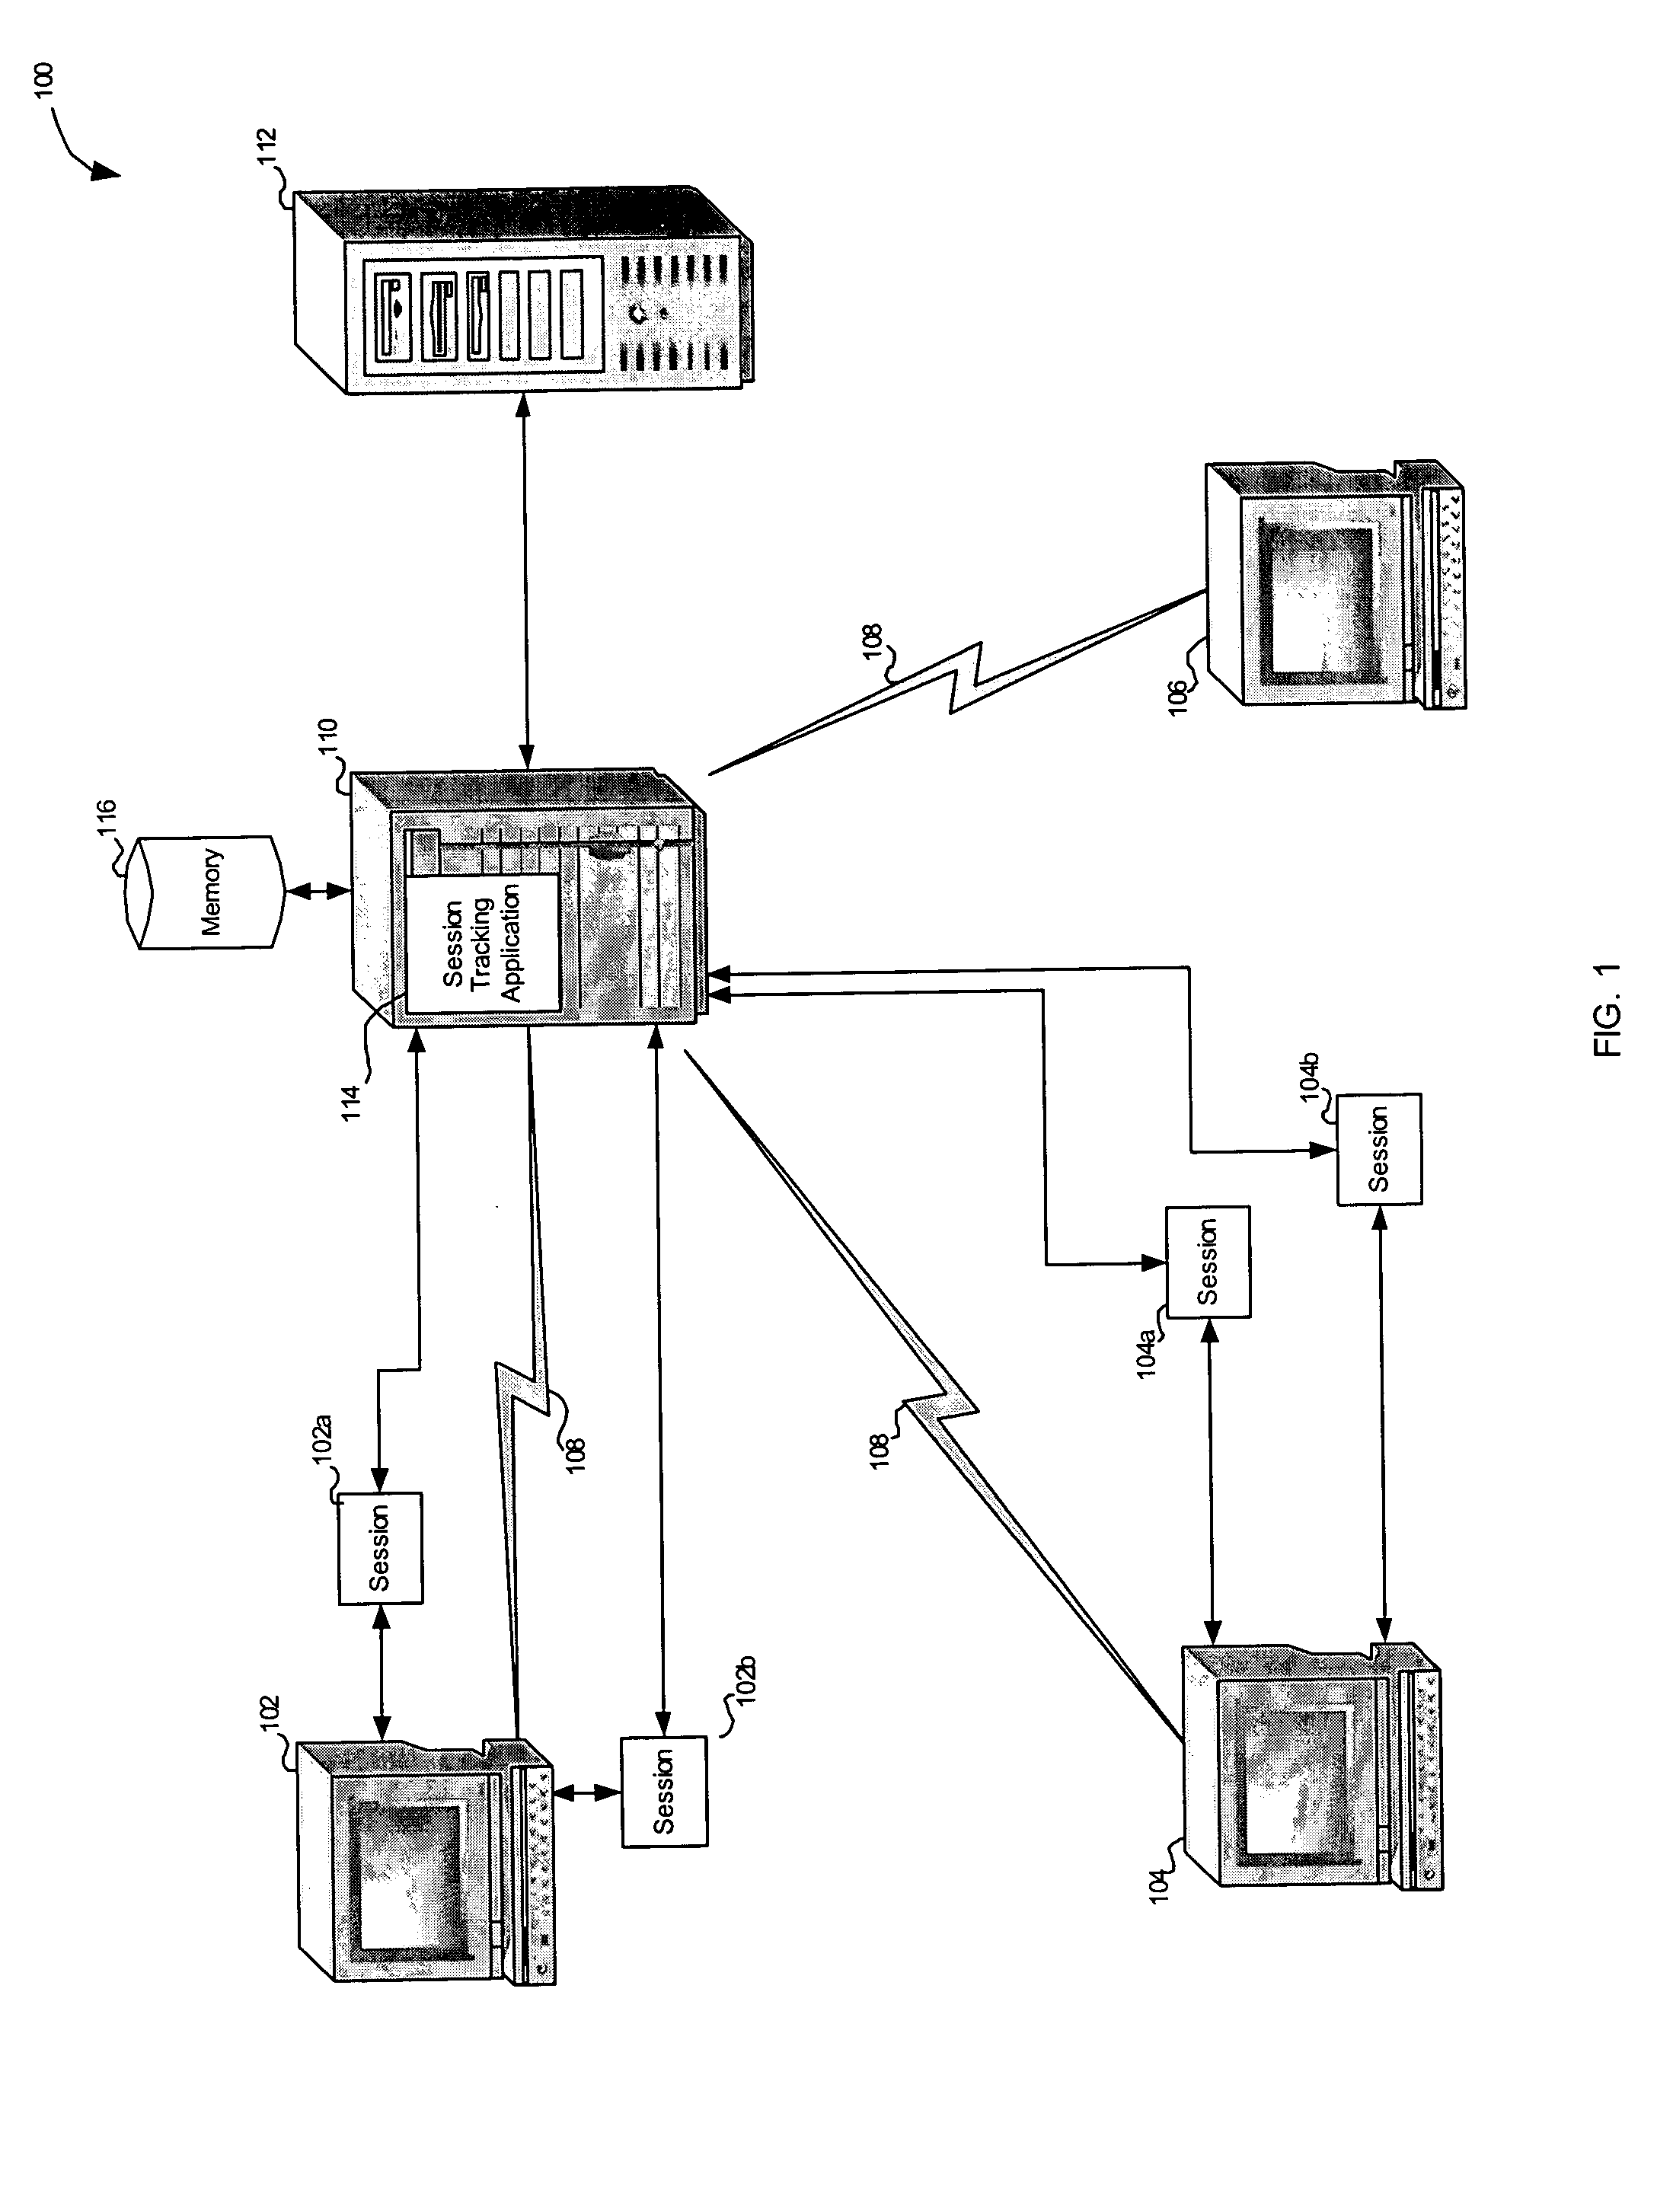 System and method for tracking web-based sessions